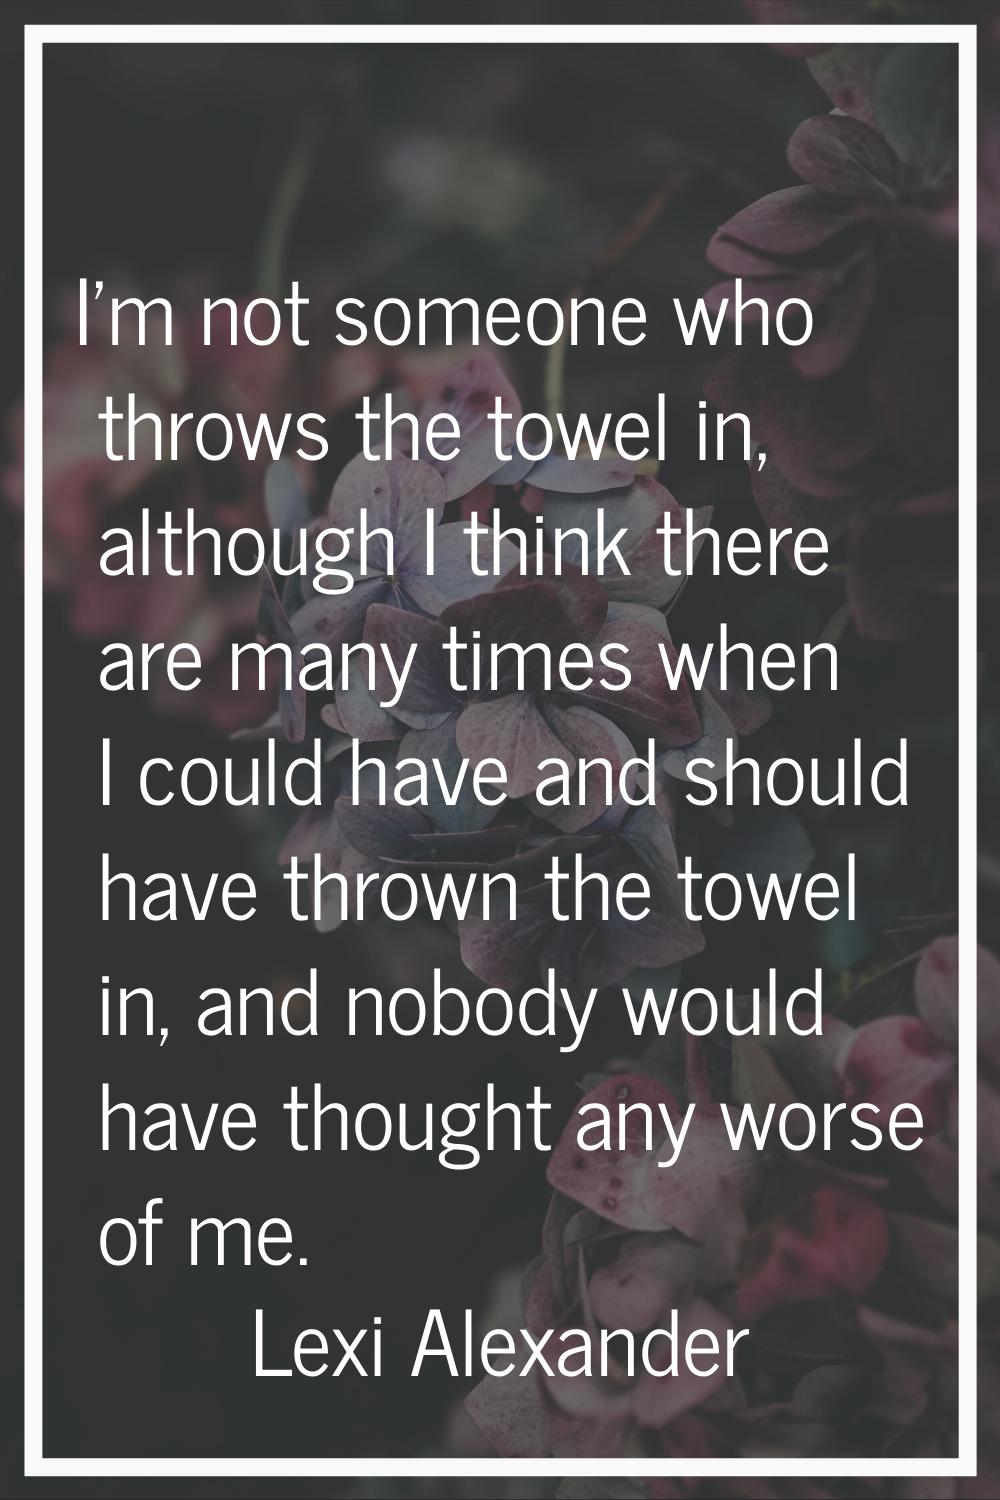 I'm not someone who throws the towel in, although I think there are many times when I could have an